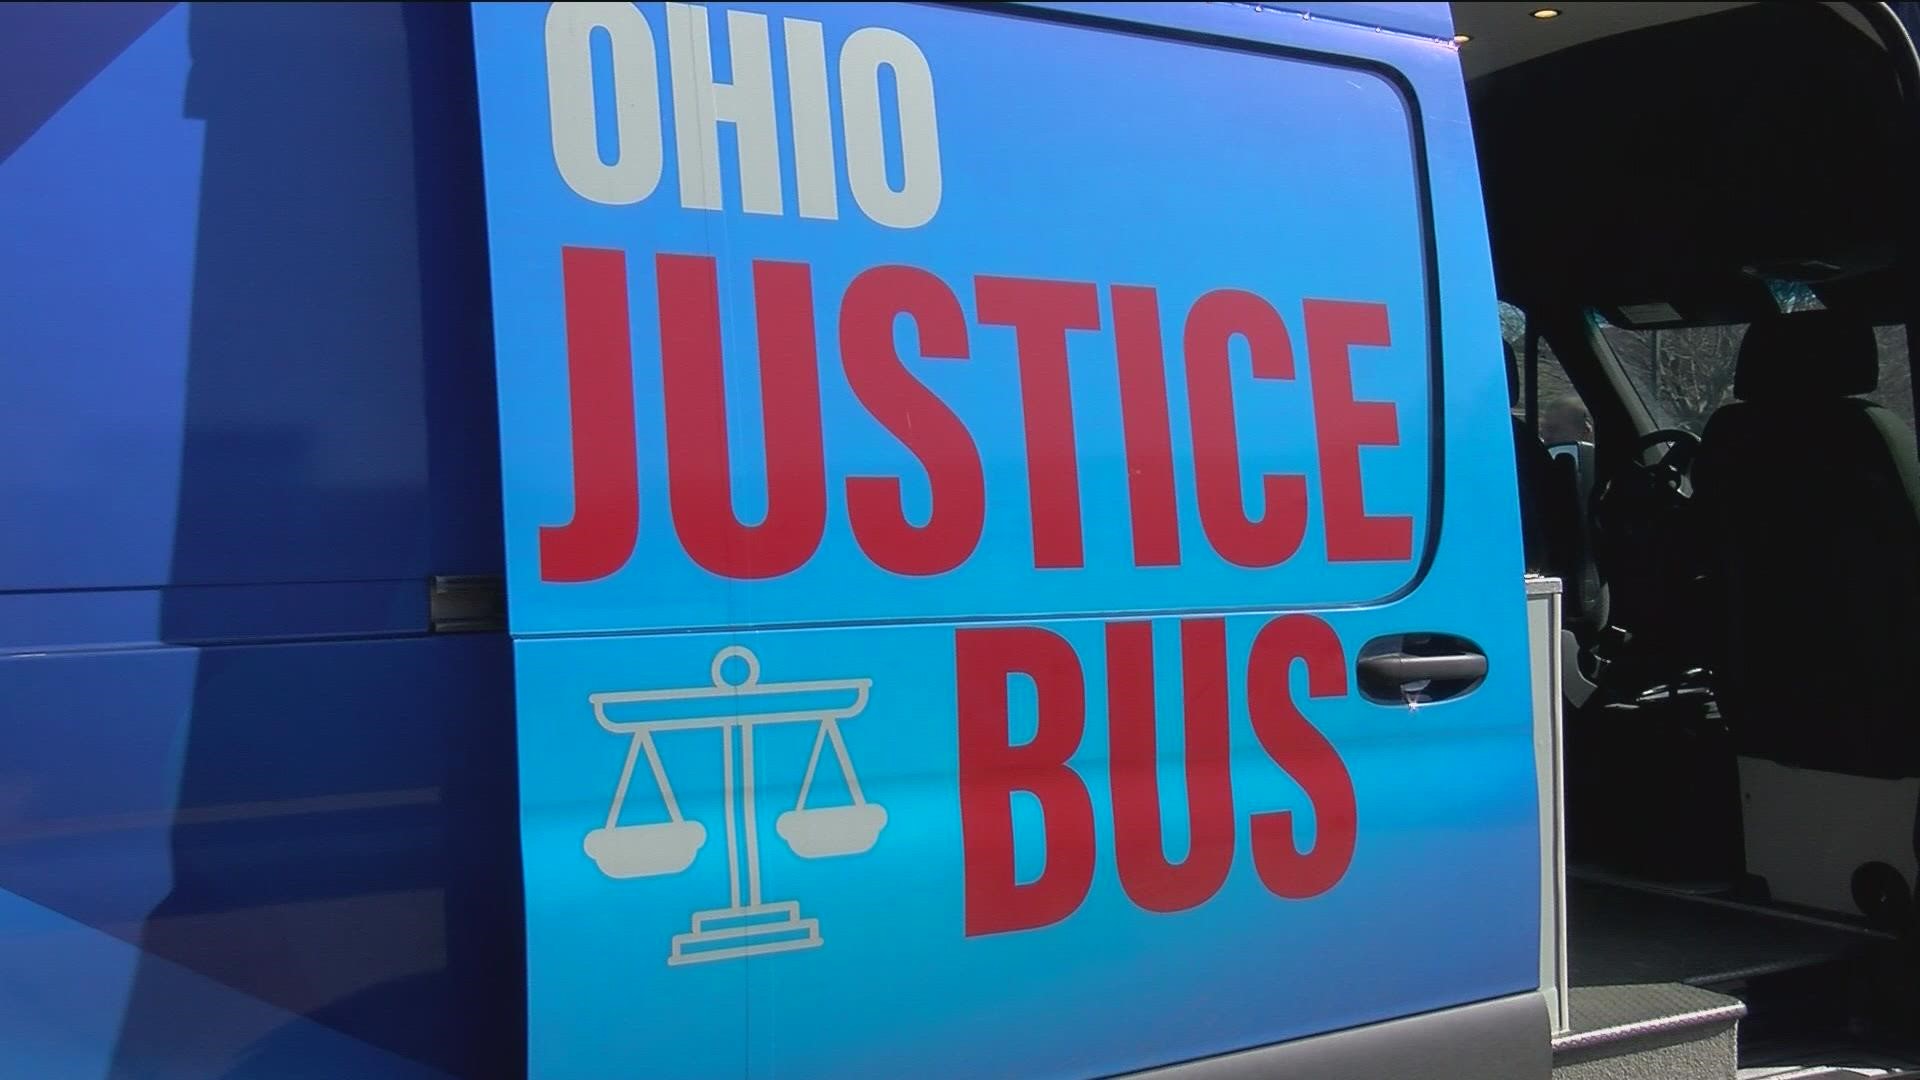 The bus provides free legal advice to low-income residents regarding a variety of matters.